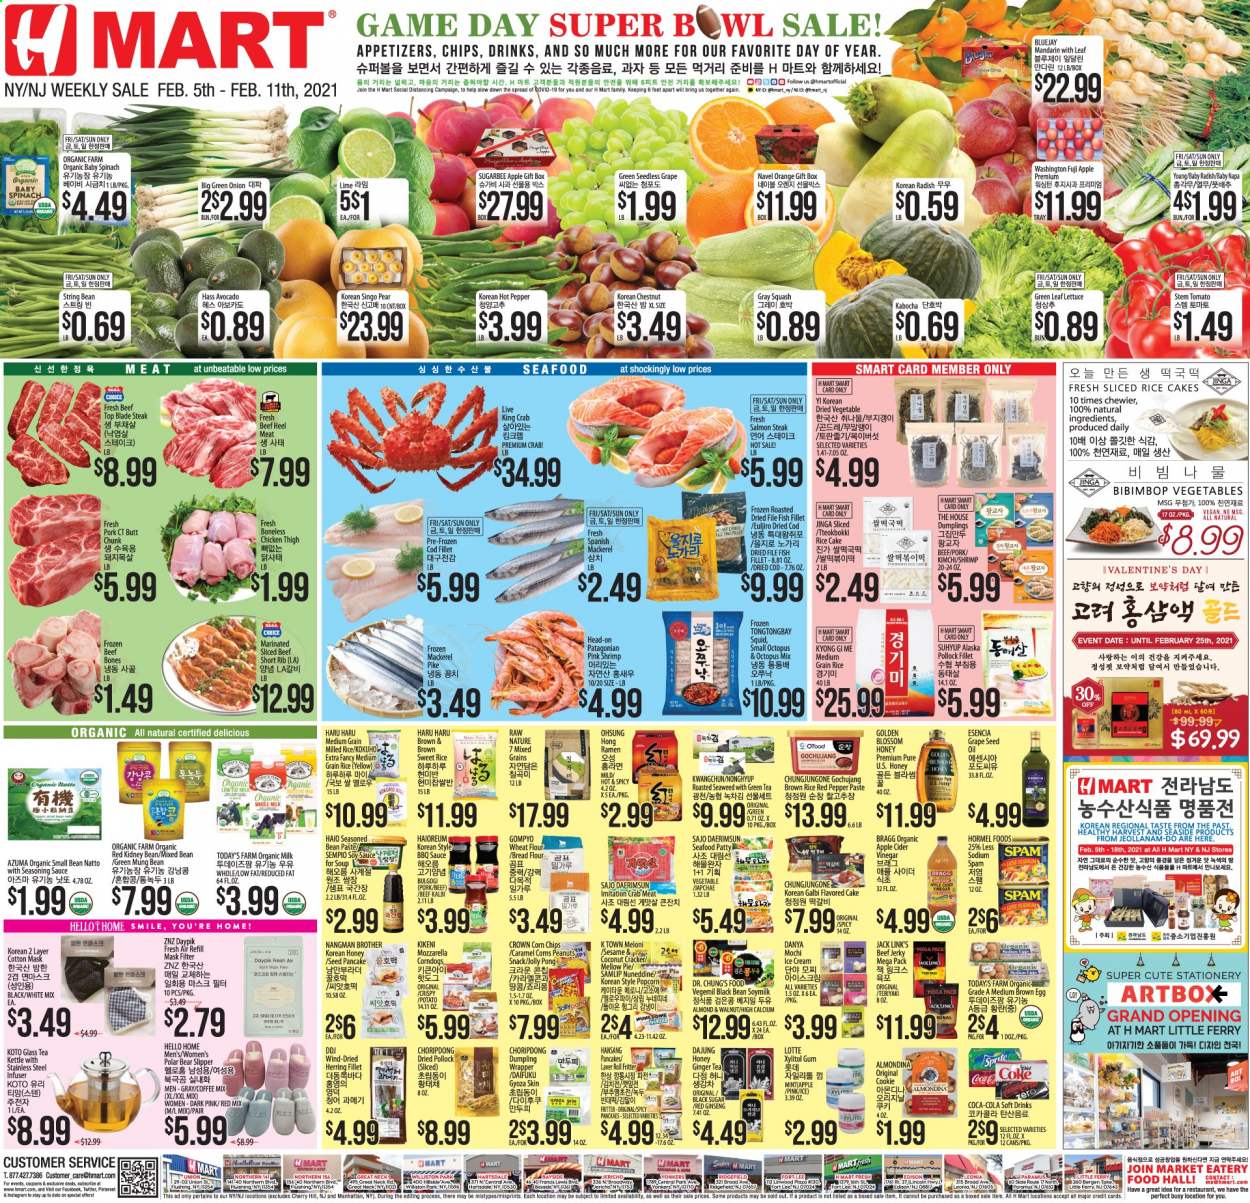 thumbnail - Hmart Flyer - 02/05/2021 - 02/11/2021 - Sales products - lettuce, Fuji apple, bread, cake, pie, pancakes, bread flour, ginger, pears, oranges, coconut, cod, crab meat, mackerel, salmon, squid, king crab, northern pike, pollock, octopus, seafood, crab, fish, shrimps, ramen, soup, dumplings, Hormel, beef jerky, jerky, Spam, mozzarella, soy milk, organic milk, eggs, Blossom, ice cream, beans, spinach, crackers, snack, corn chips, popcorn, Jack Link's, flour, sugar, wheat flour, seaweed, mandarines, brown rice, whole grain rice, BBQ sauce, caramel, soy sauce, apple cider vinegar, oil, grape seed oil, honey, walnuts, chestnuts, Coca-Cola, Sprite, soft drink, green tea, tea, coffee, beef meat, steak, top blade, bin, wrapper, bowl, Brother, calcium, ginseng, avocado. Page 1.